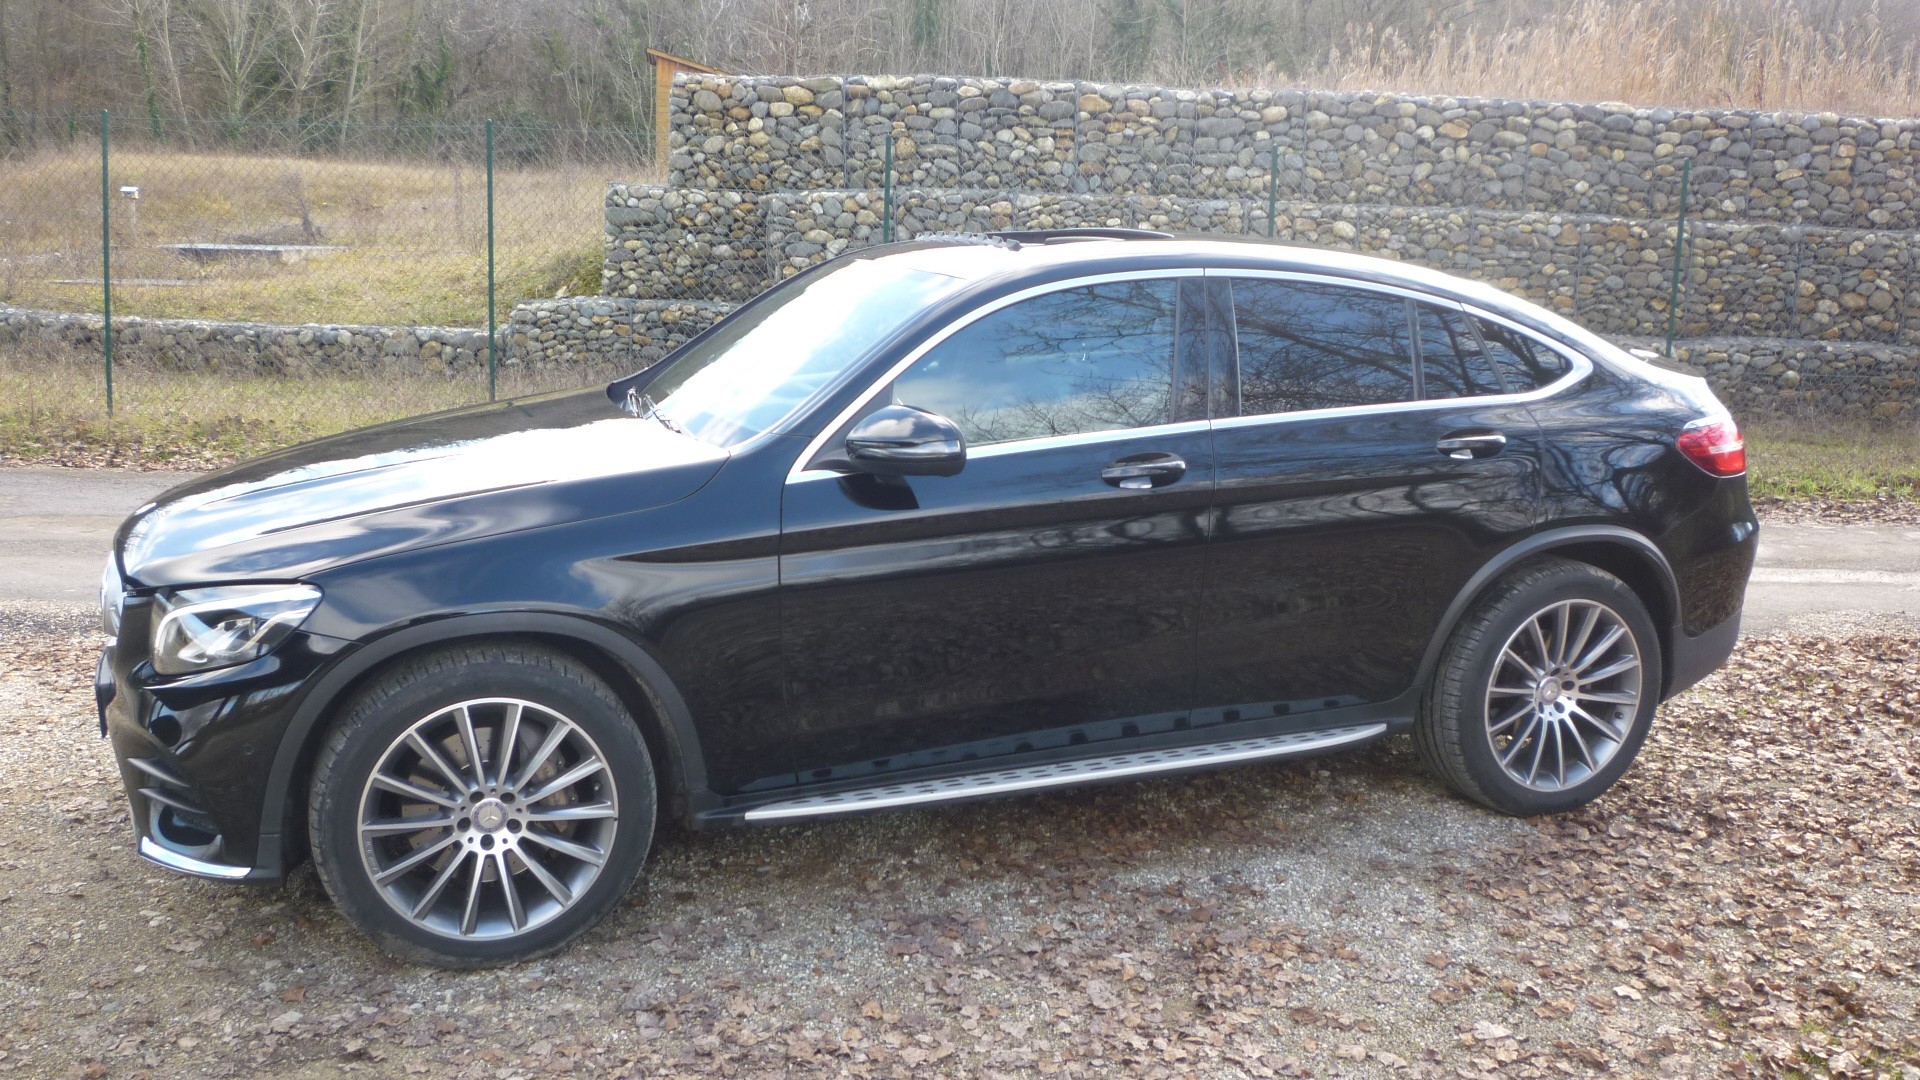 MERCEDES GLC COUPE 220 CDI 170CH 4-MATIC 9G-TRONIC - GPS - CAMERA - ATH - ATTELAGE ELEC